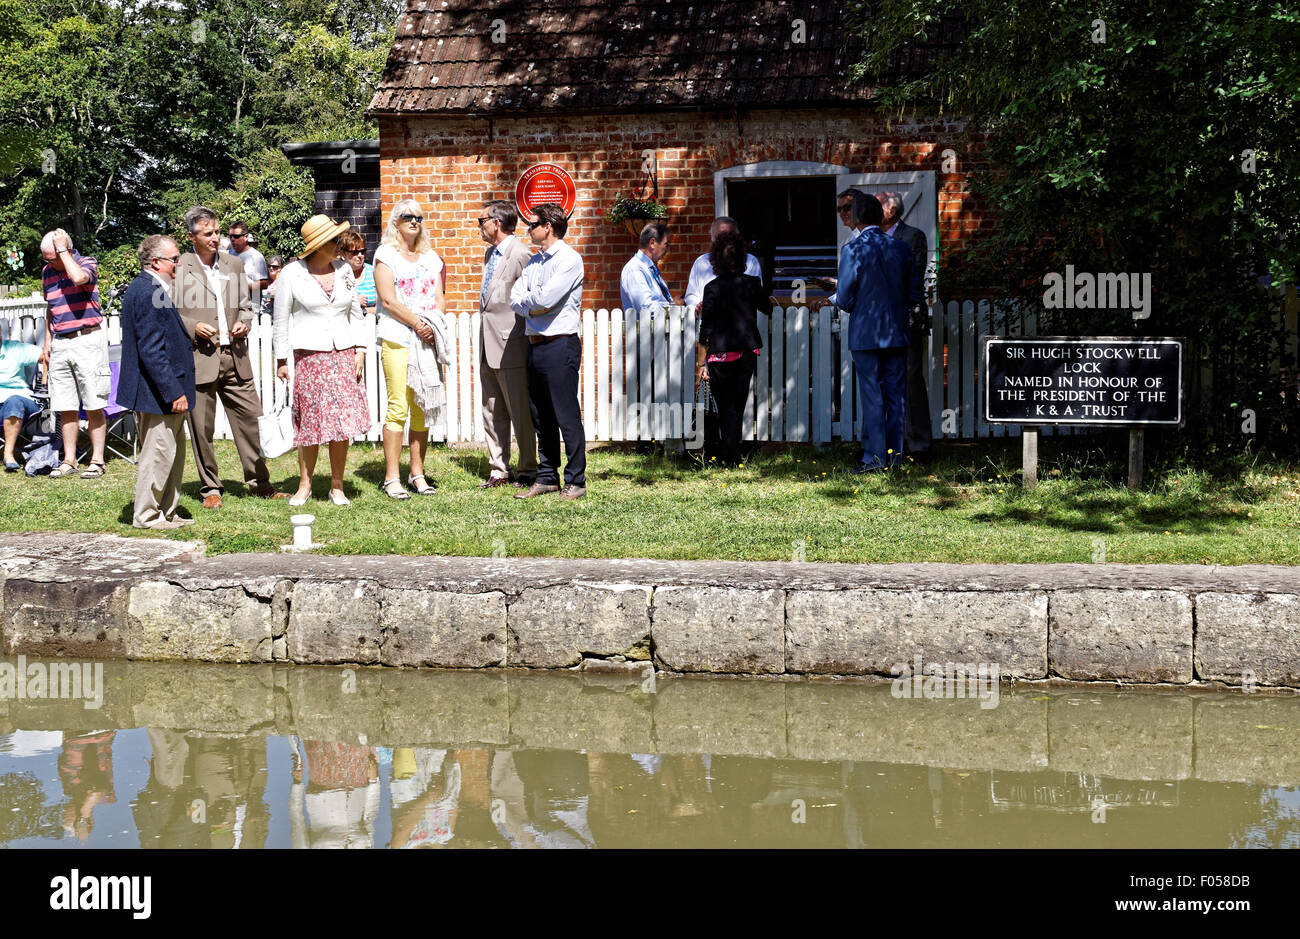 Sir Hugh Stockwell Lock near , Devizes, Wilts.UK. 07th Aug, 2015. Dignitaries waiting for unveiling ceremony on Kennet & Avon canal  after 25 years of reopening. Stock Photo